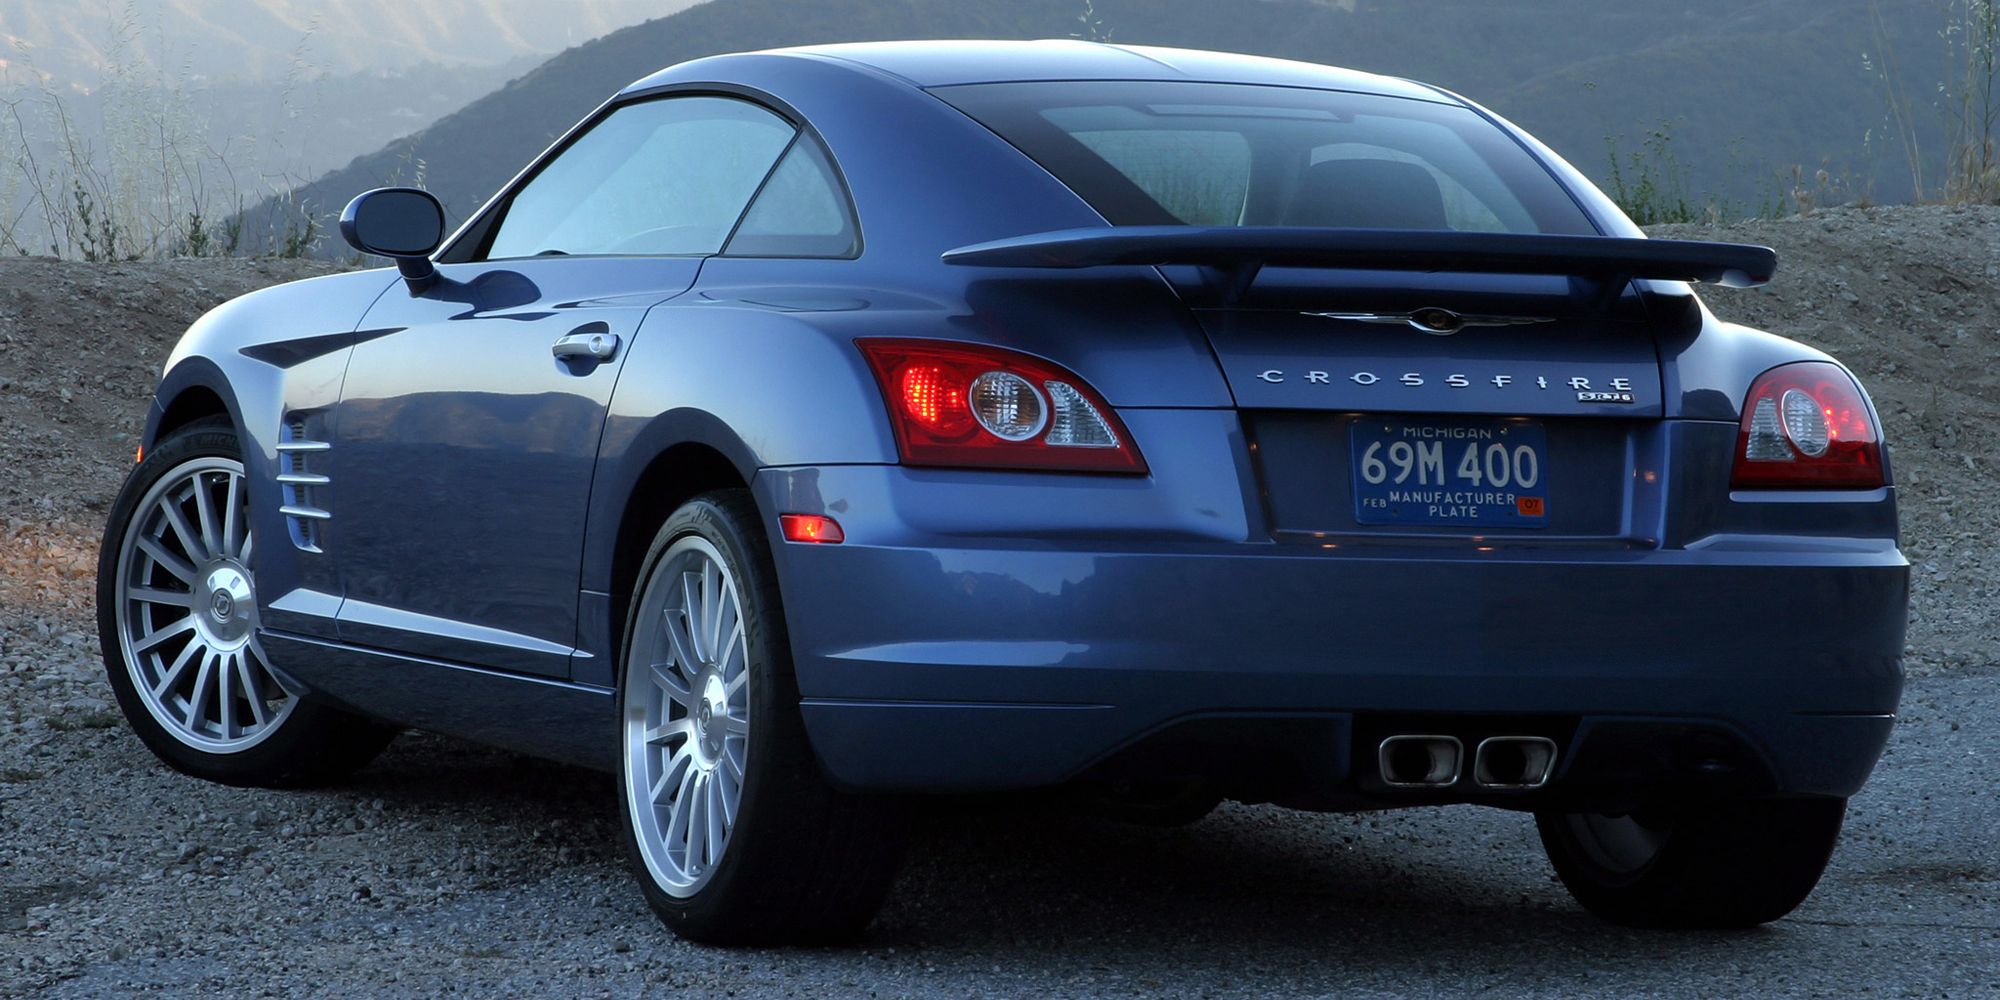 The rear of the Crossfire SRT6